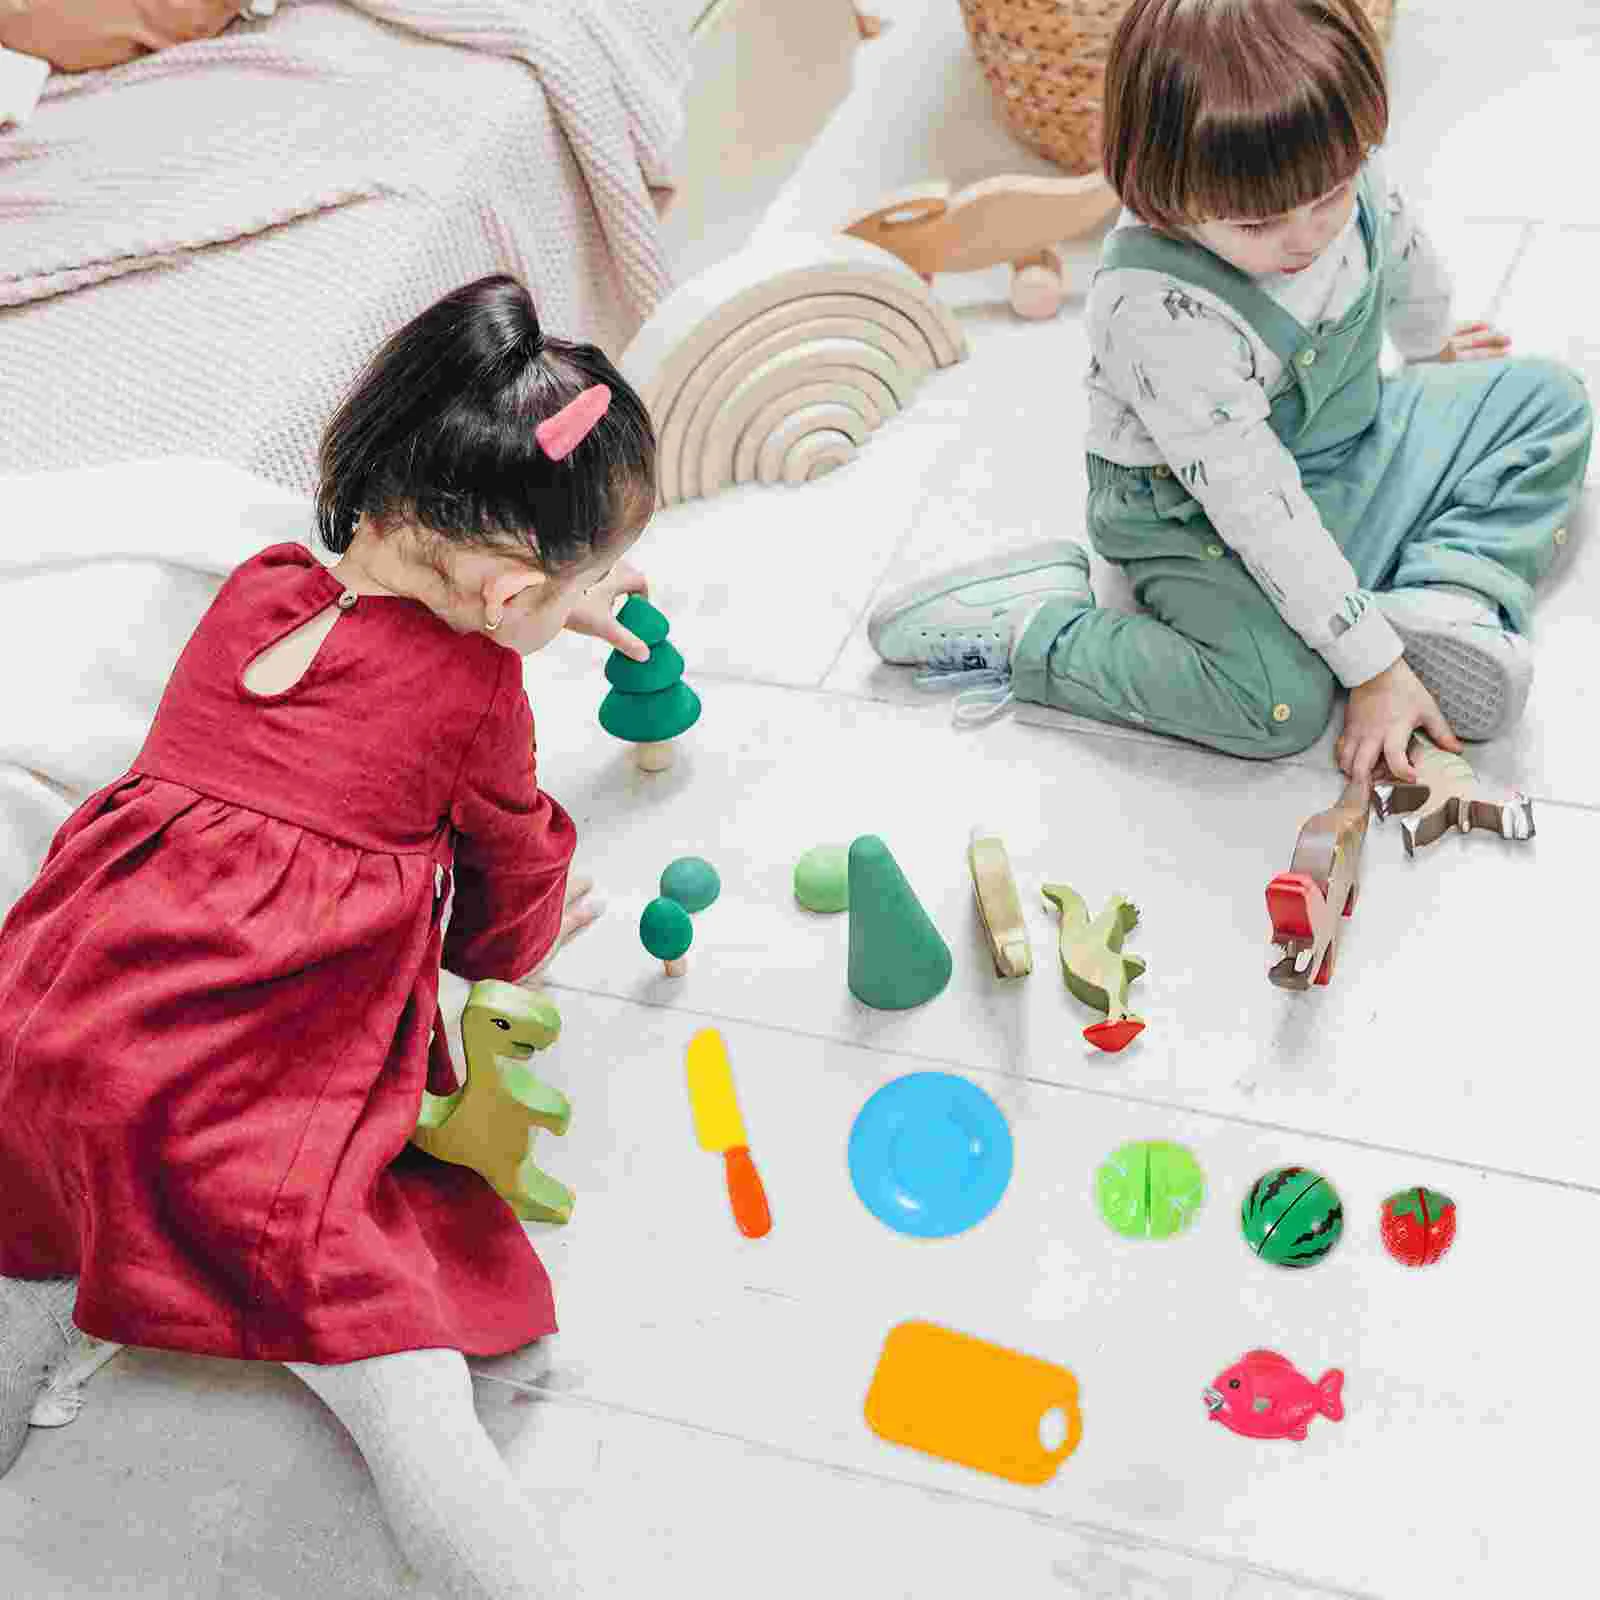 

Childrens Toys Chichele Cutting for Toddlers Pizza Playing House Prop Educational Playthings Cognitive Kitchen Playset